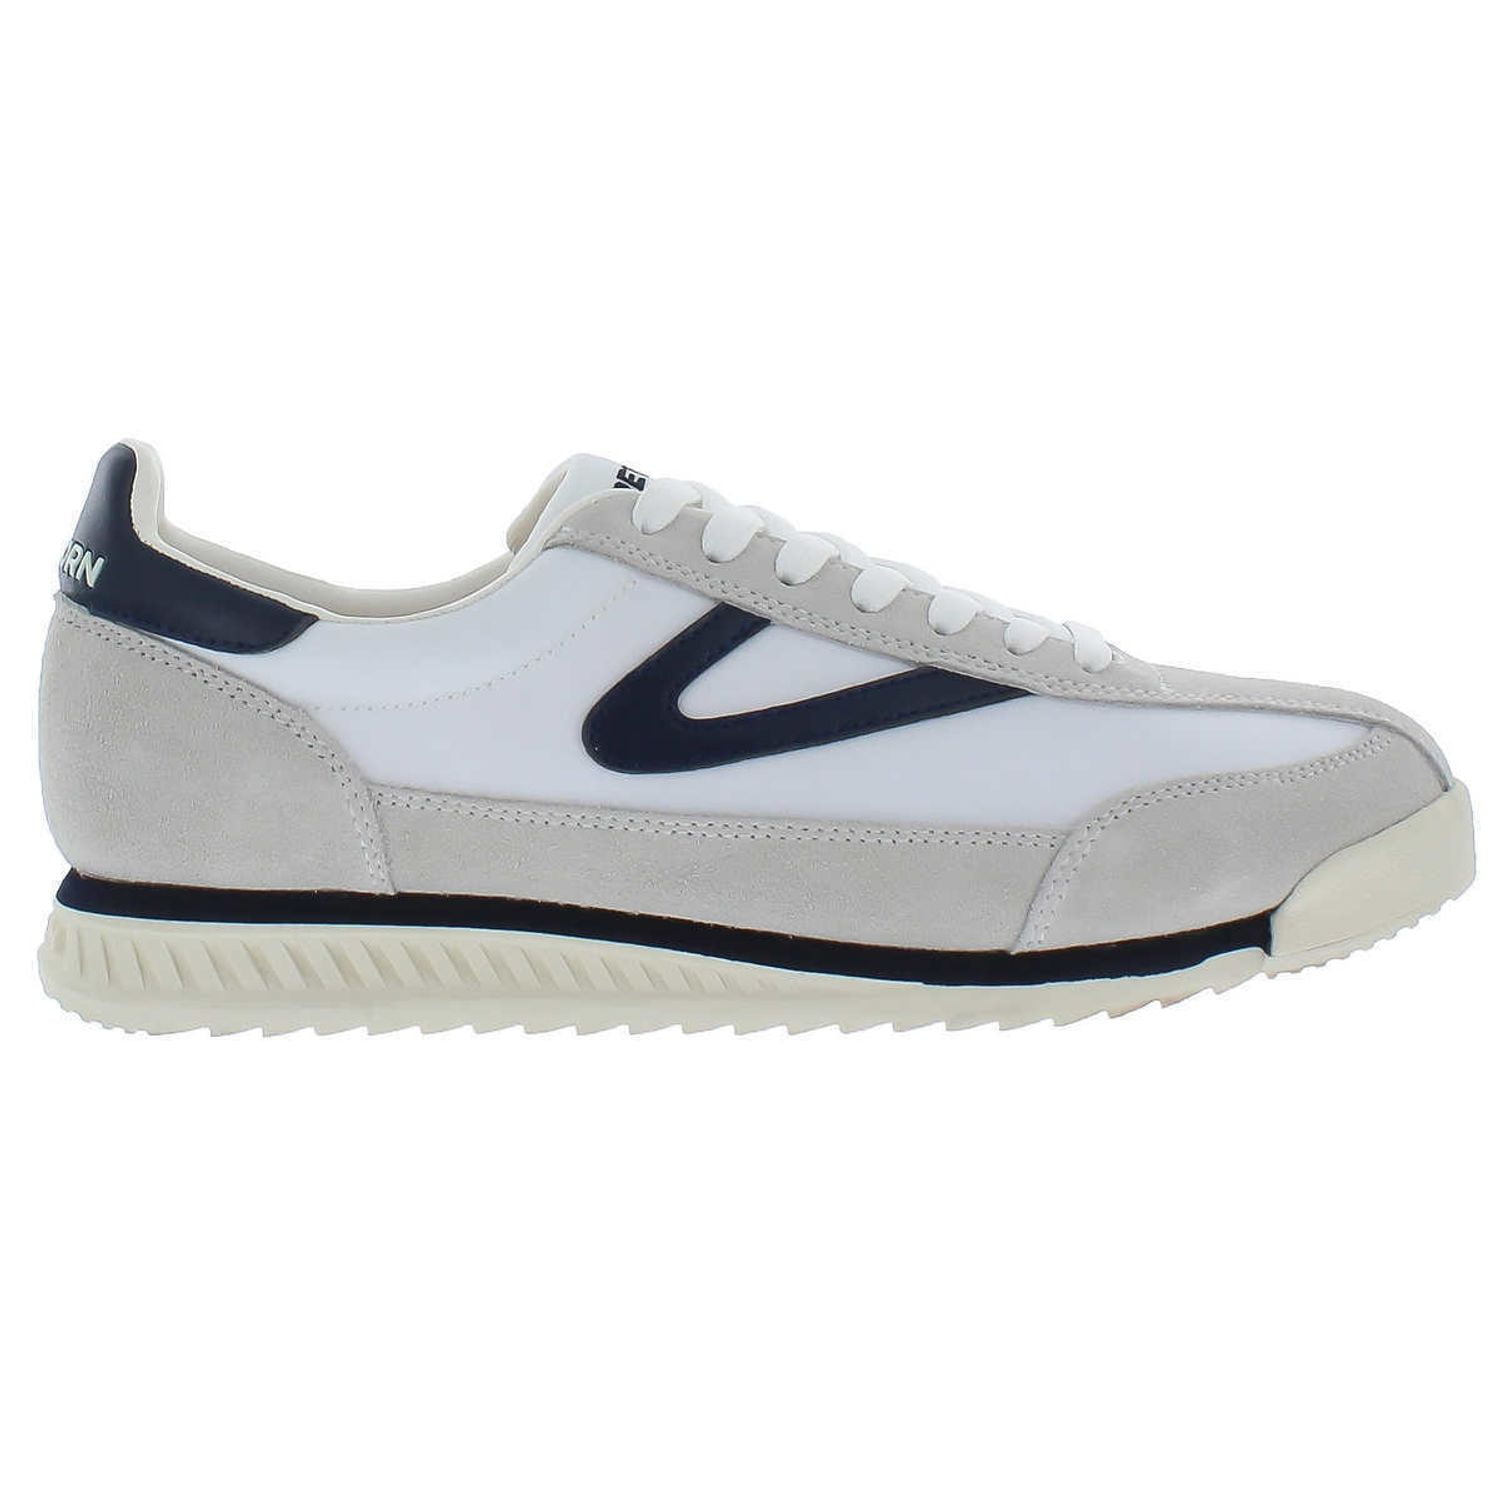 vorm ideologie Buik Treton Women Rawlins Sneakers Lace-Up Casual Tennis Shoes with Classic  Vintage Style, White/Navy 9 - Walmart.com